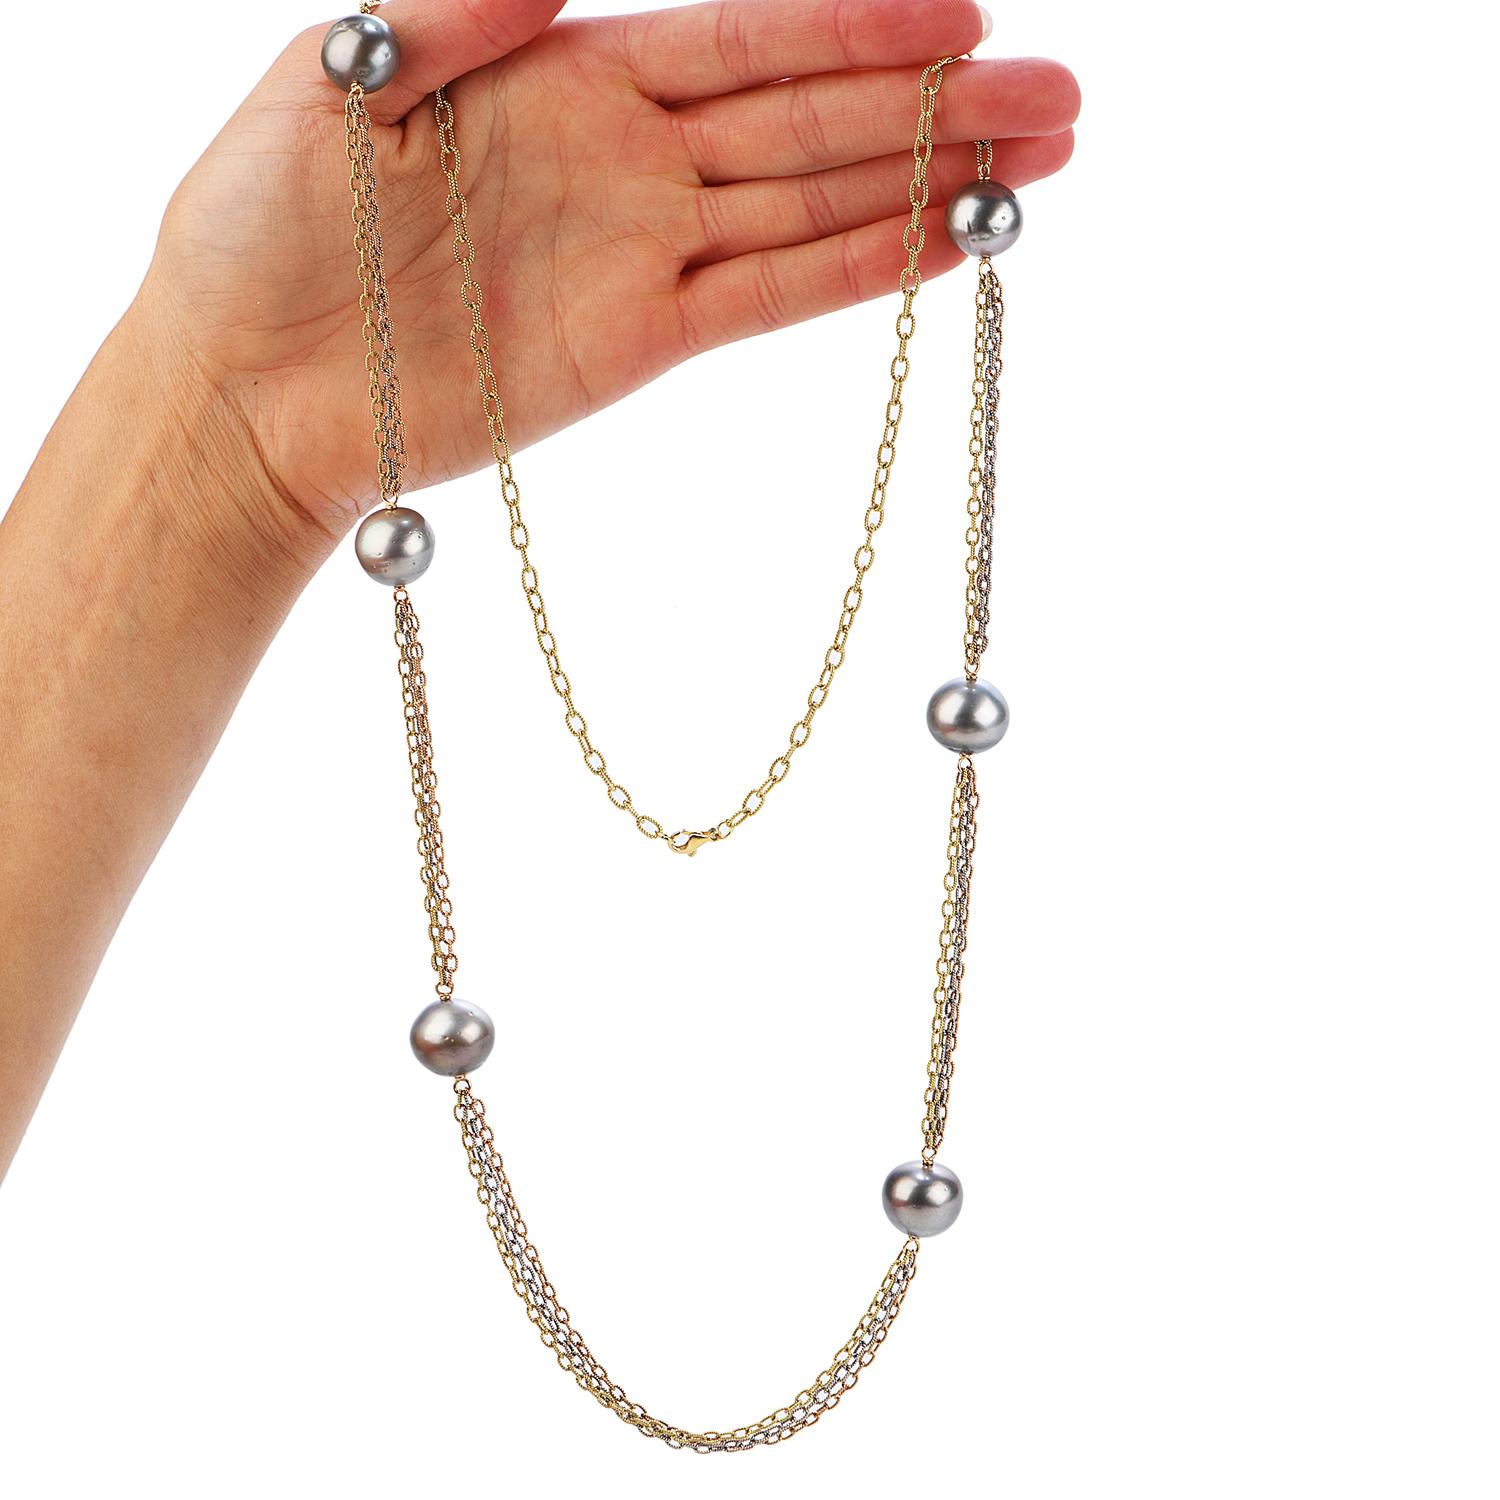 Modern South Sea Pearl 18k TriTone Gold Link Chain Necklace